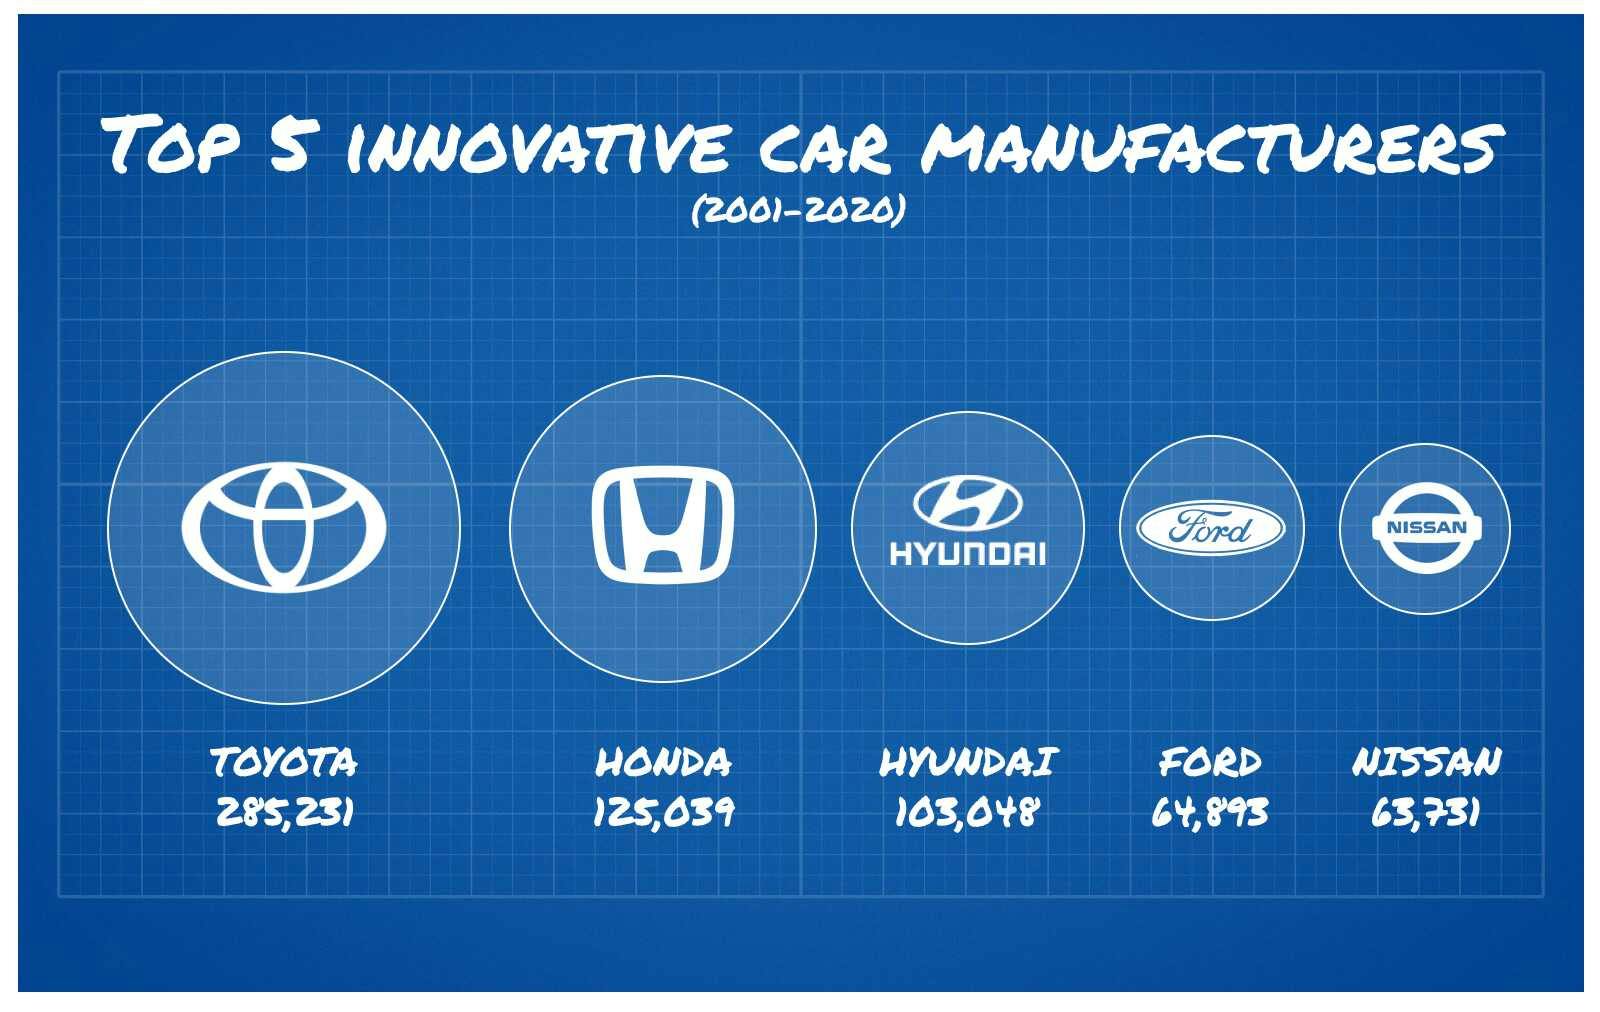 Top 5 innovations in the automotive industry